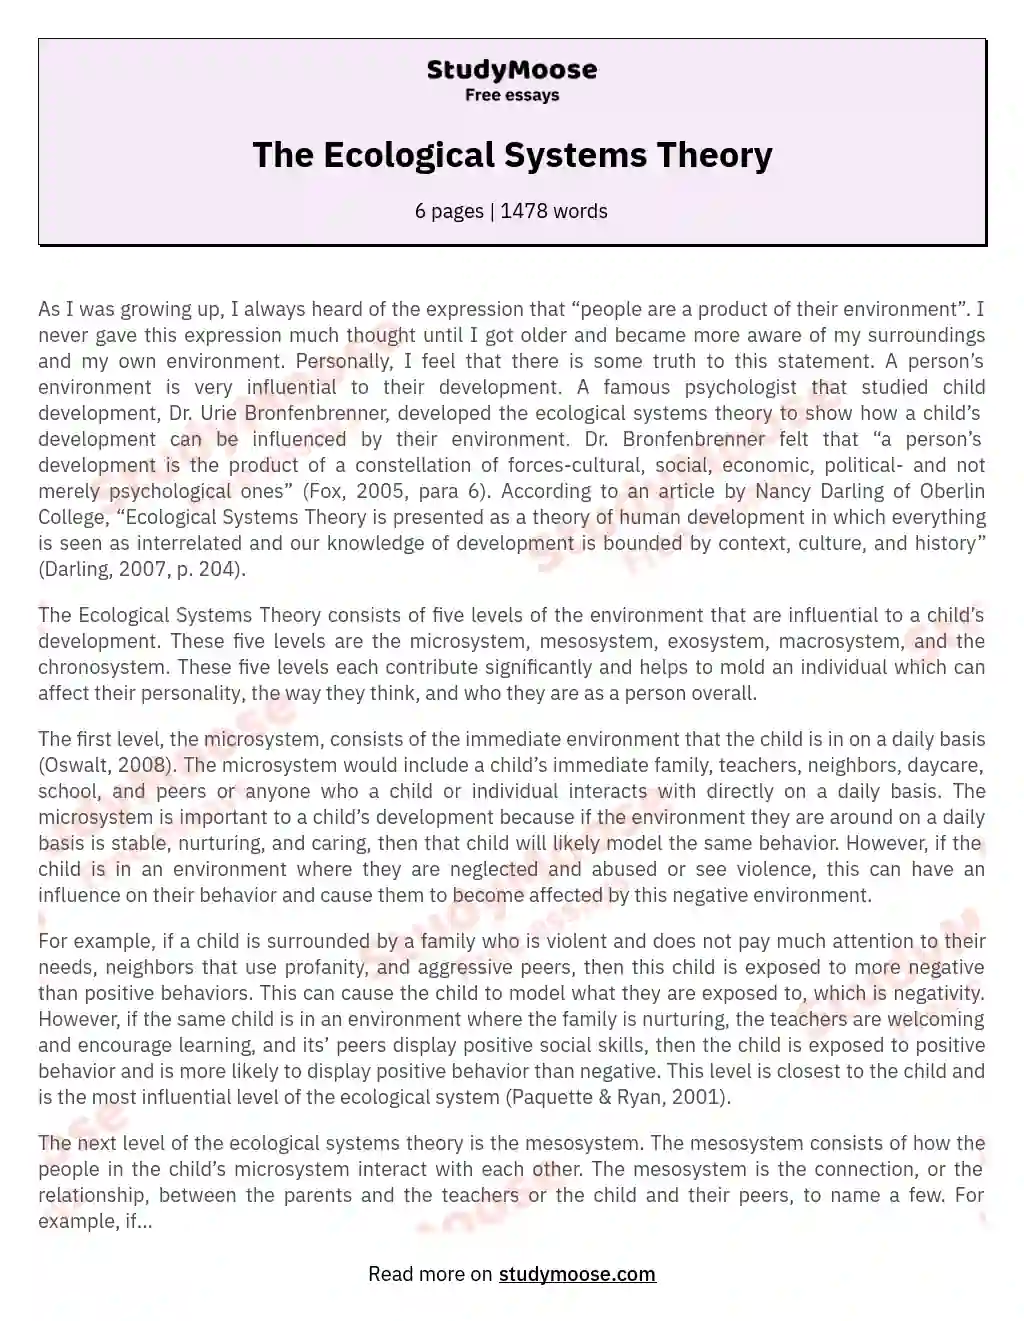 The Ecological Systems Theory essay